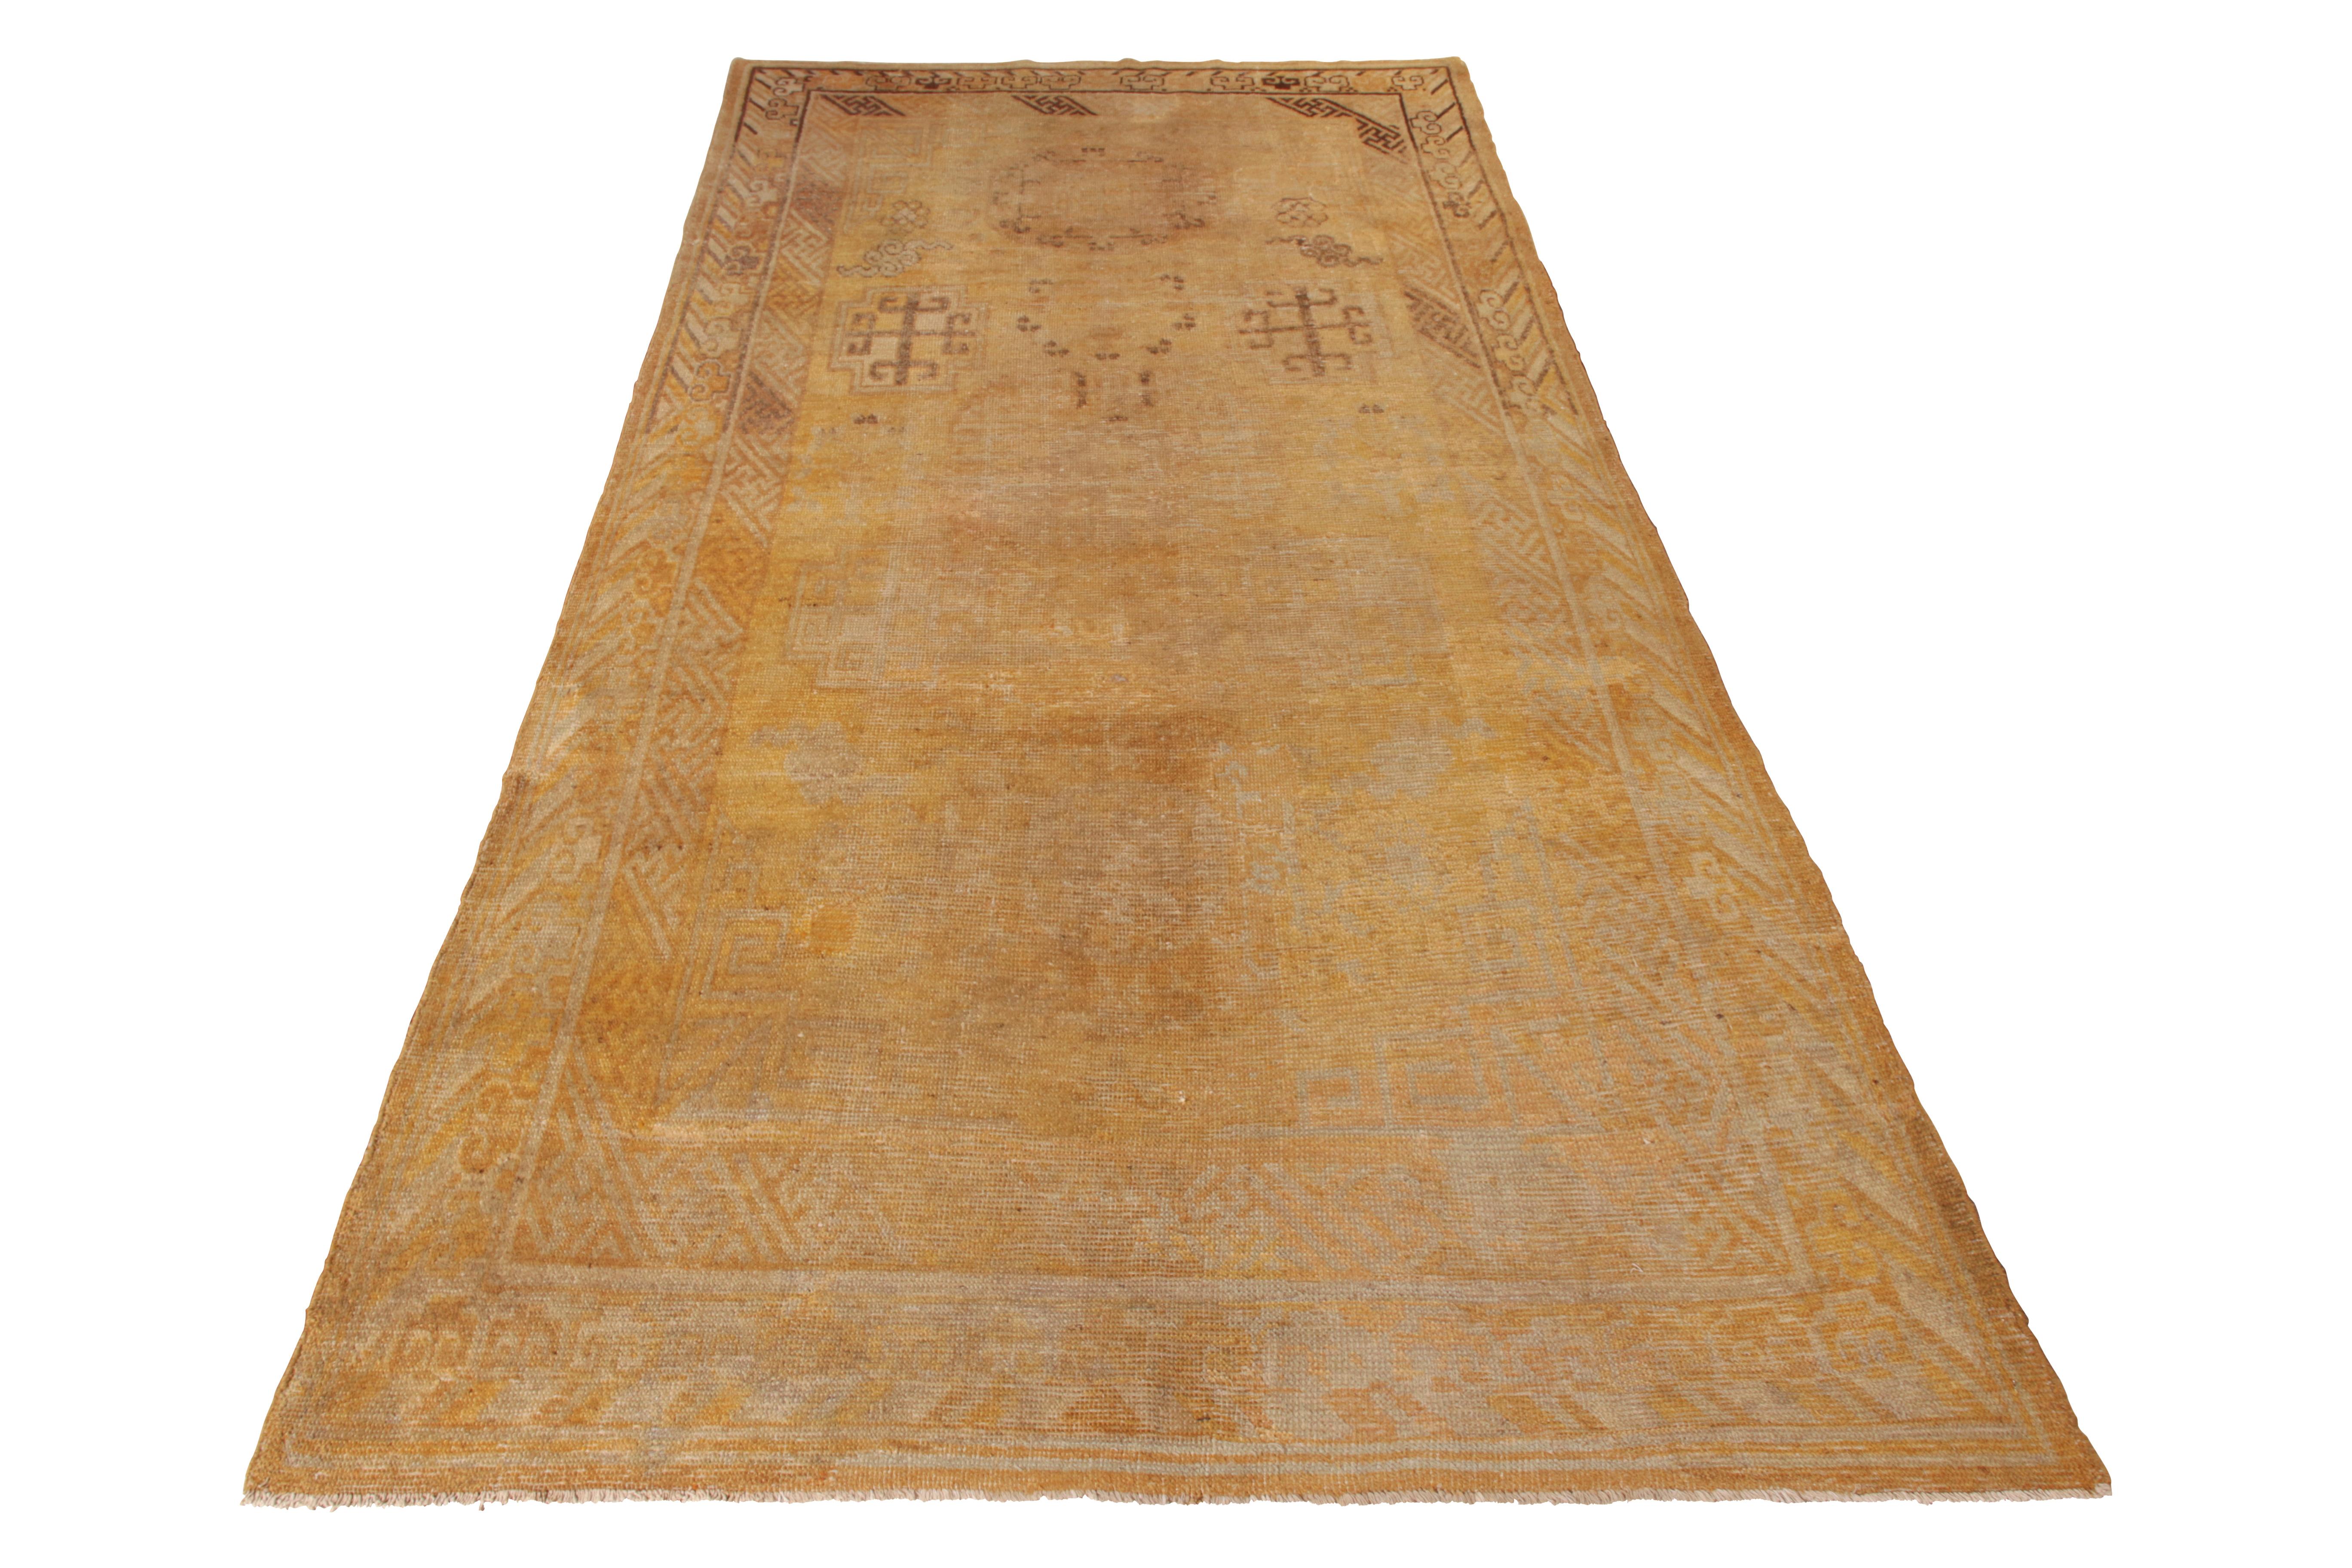 An antique 5 x 9 Khotan rug in beige-brown and gold, hand knotted in wool from East Turkestan, circa 1920-1930. Some distressed to the field, depicting ornate medallion patterns among the variety of intriguing oriental symbols this lineage